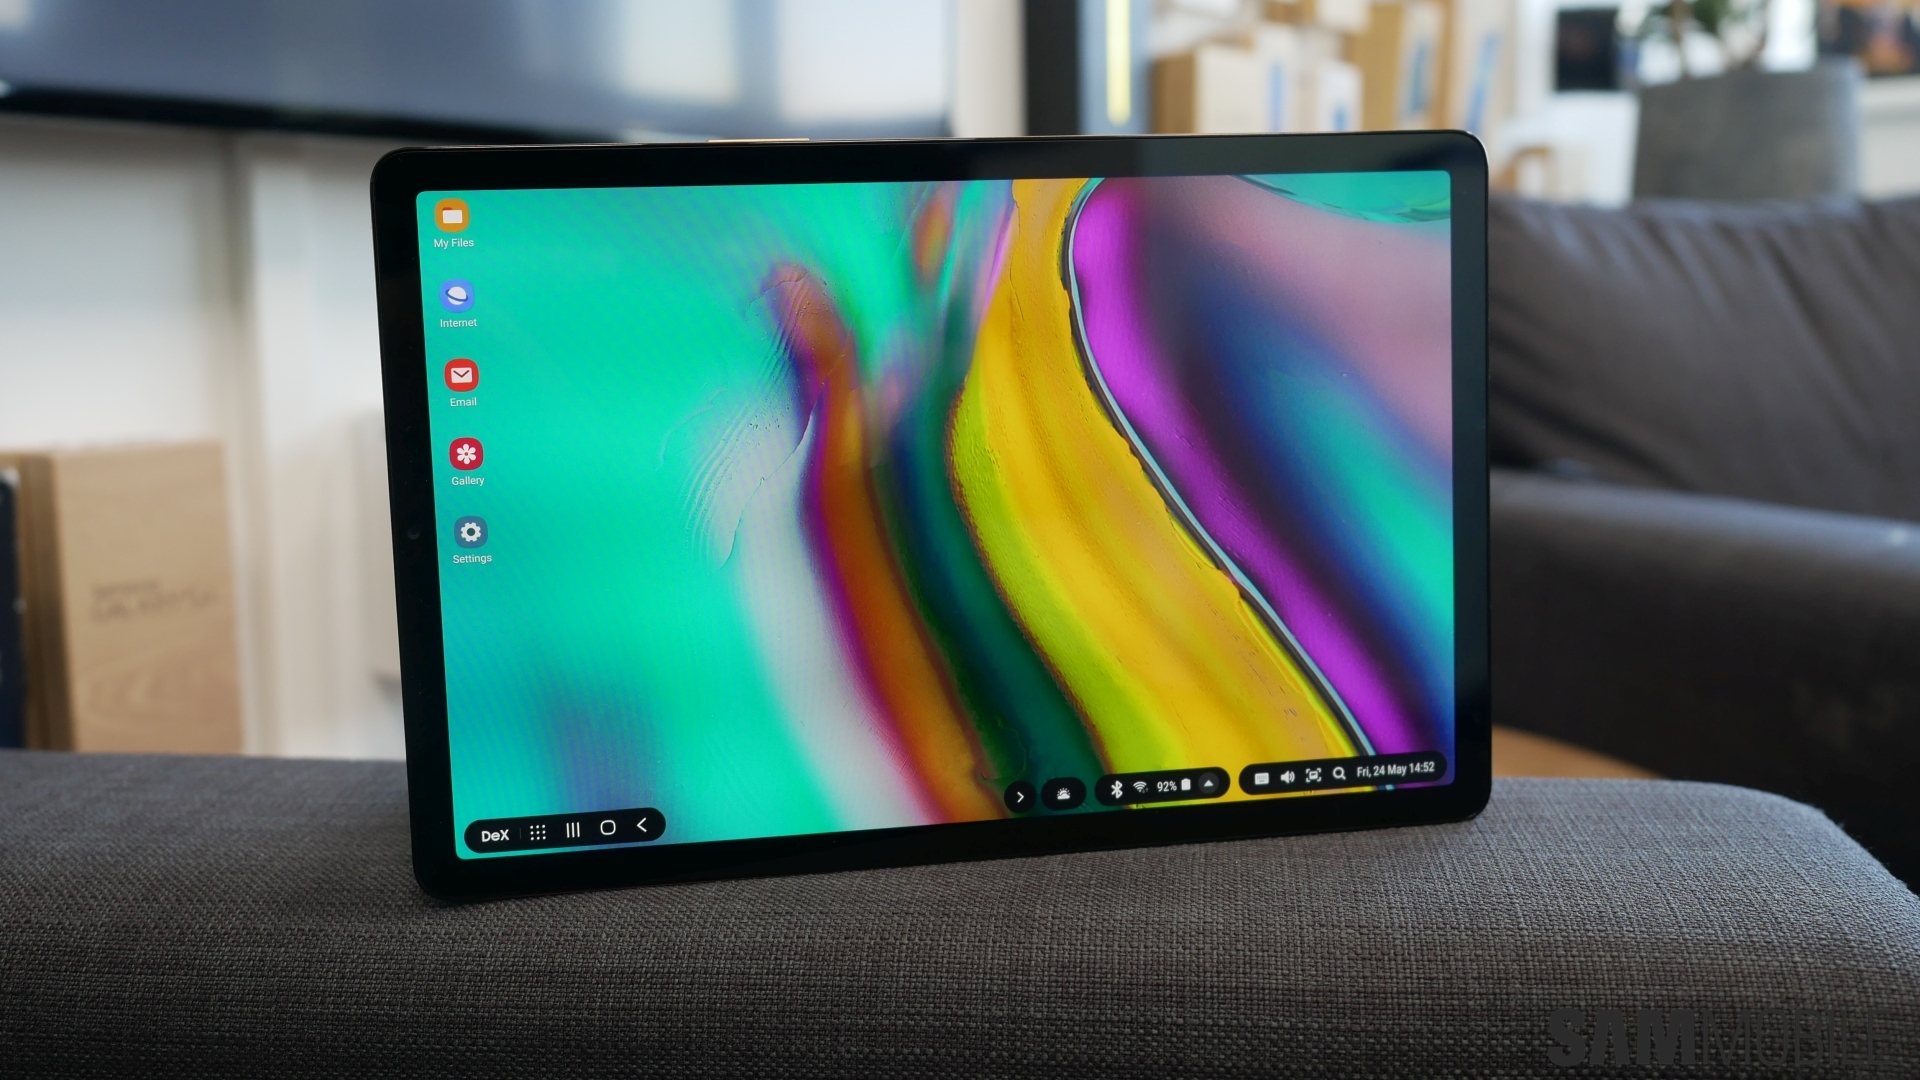 Samsung Galaxy Tab S5e review: An unbeatable value proposition